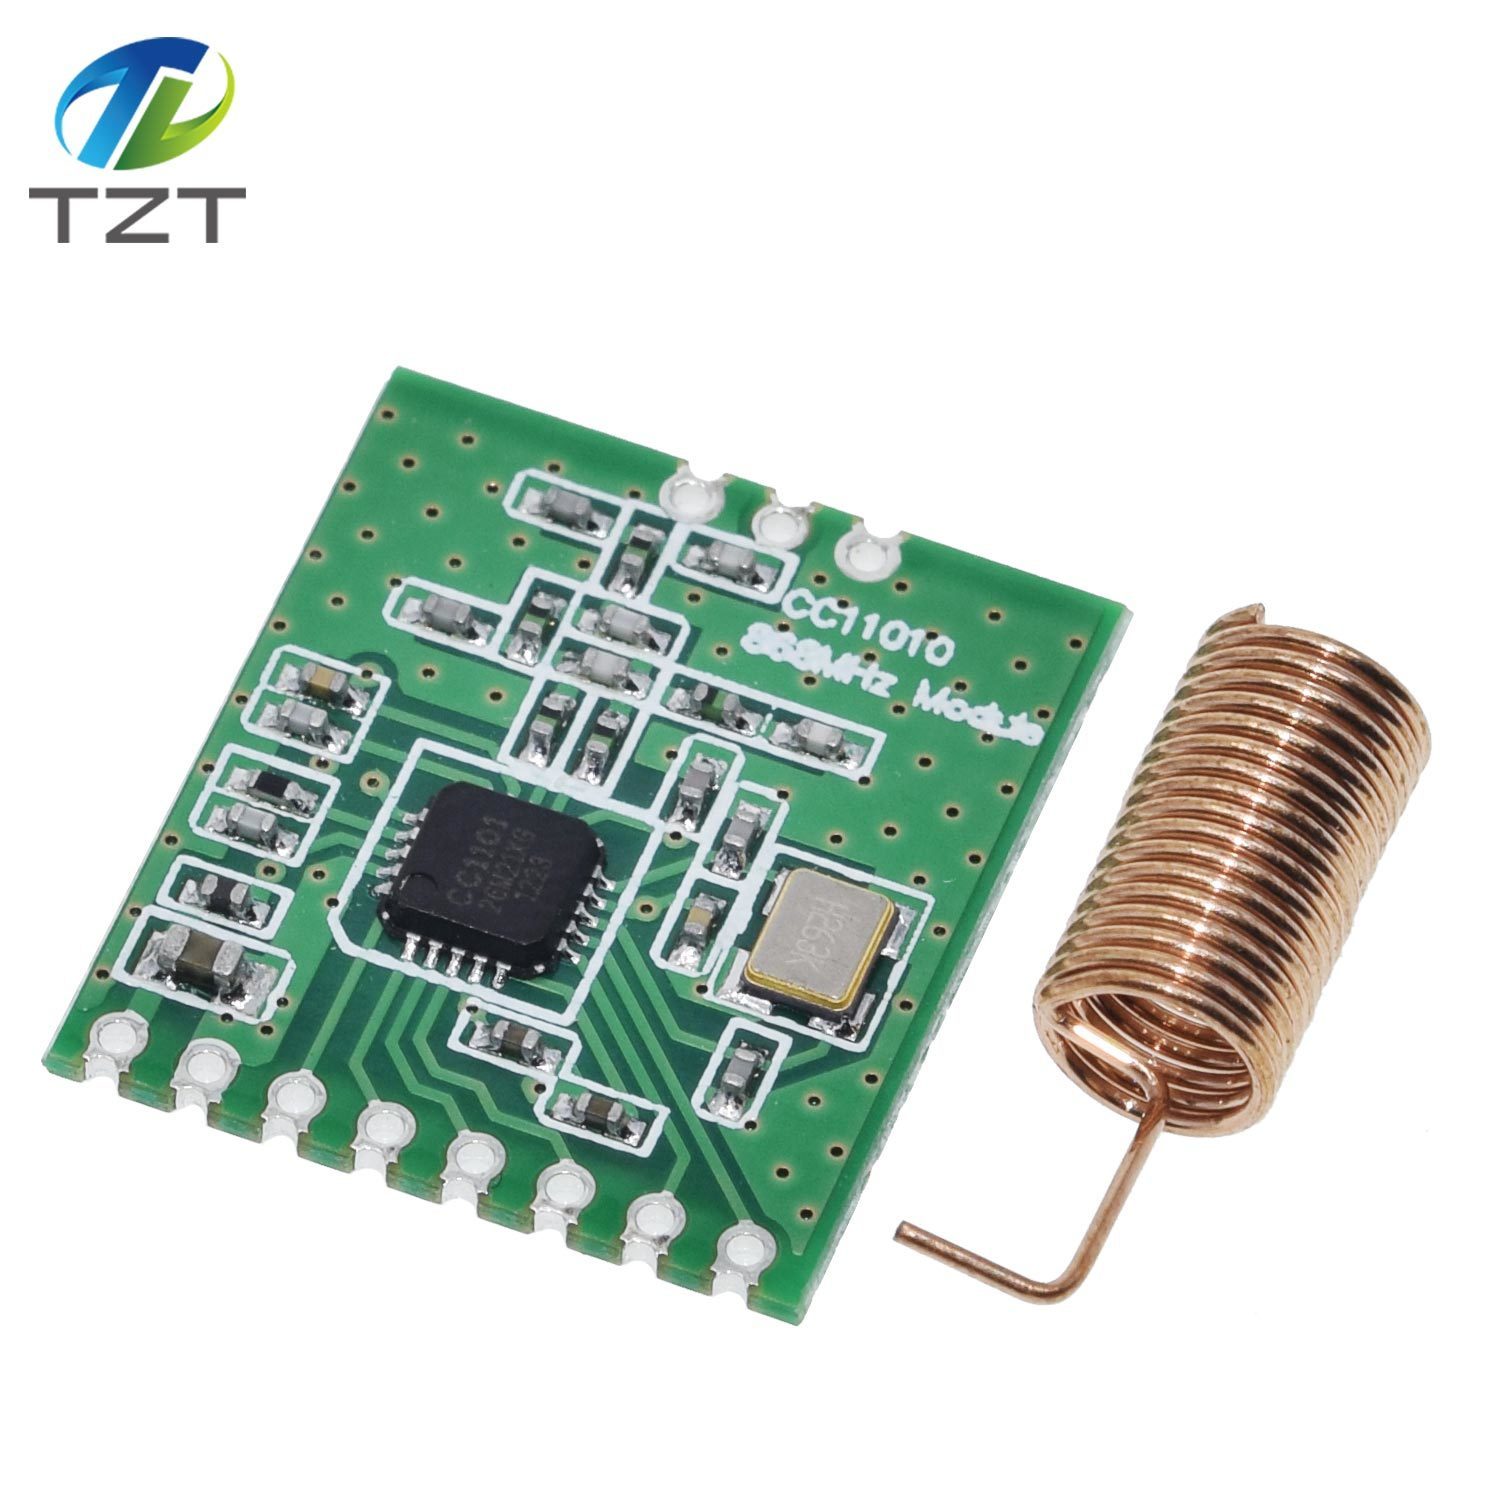 TZT CC1101 Wireless Module Long Distance Transmission Antenna 868MHZ SPI Interface Low Power M115 For FSK GFSK ASK OOK MSK 64-byte